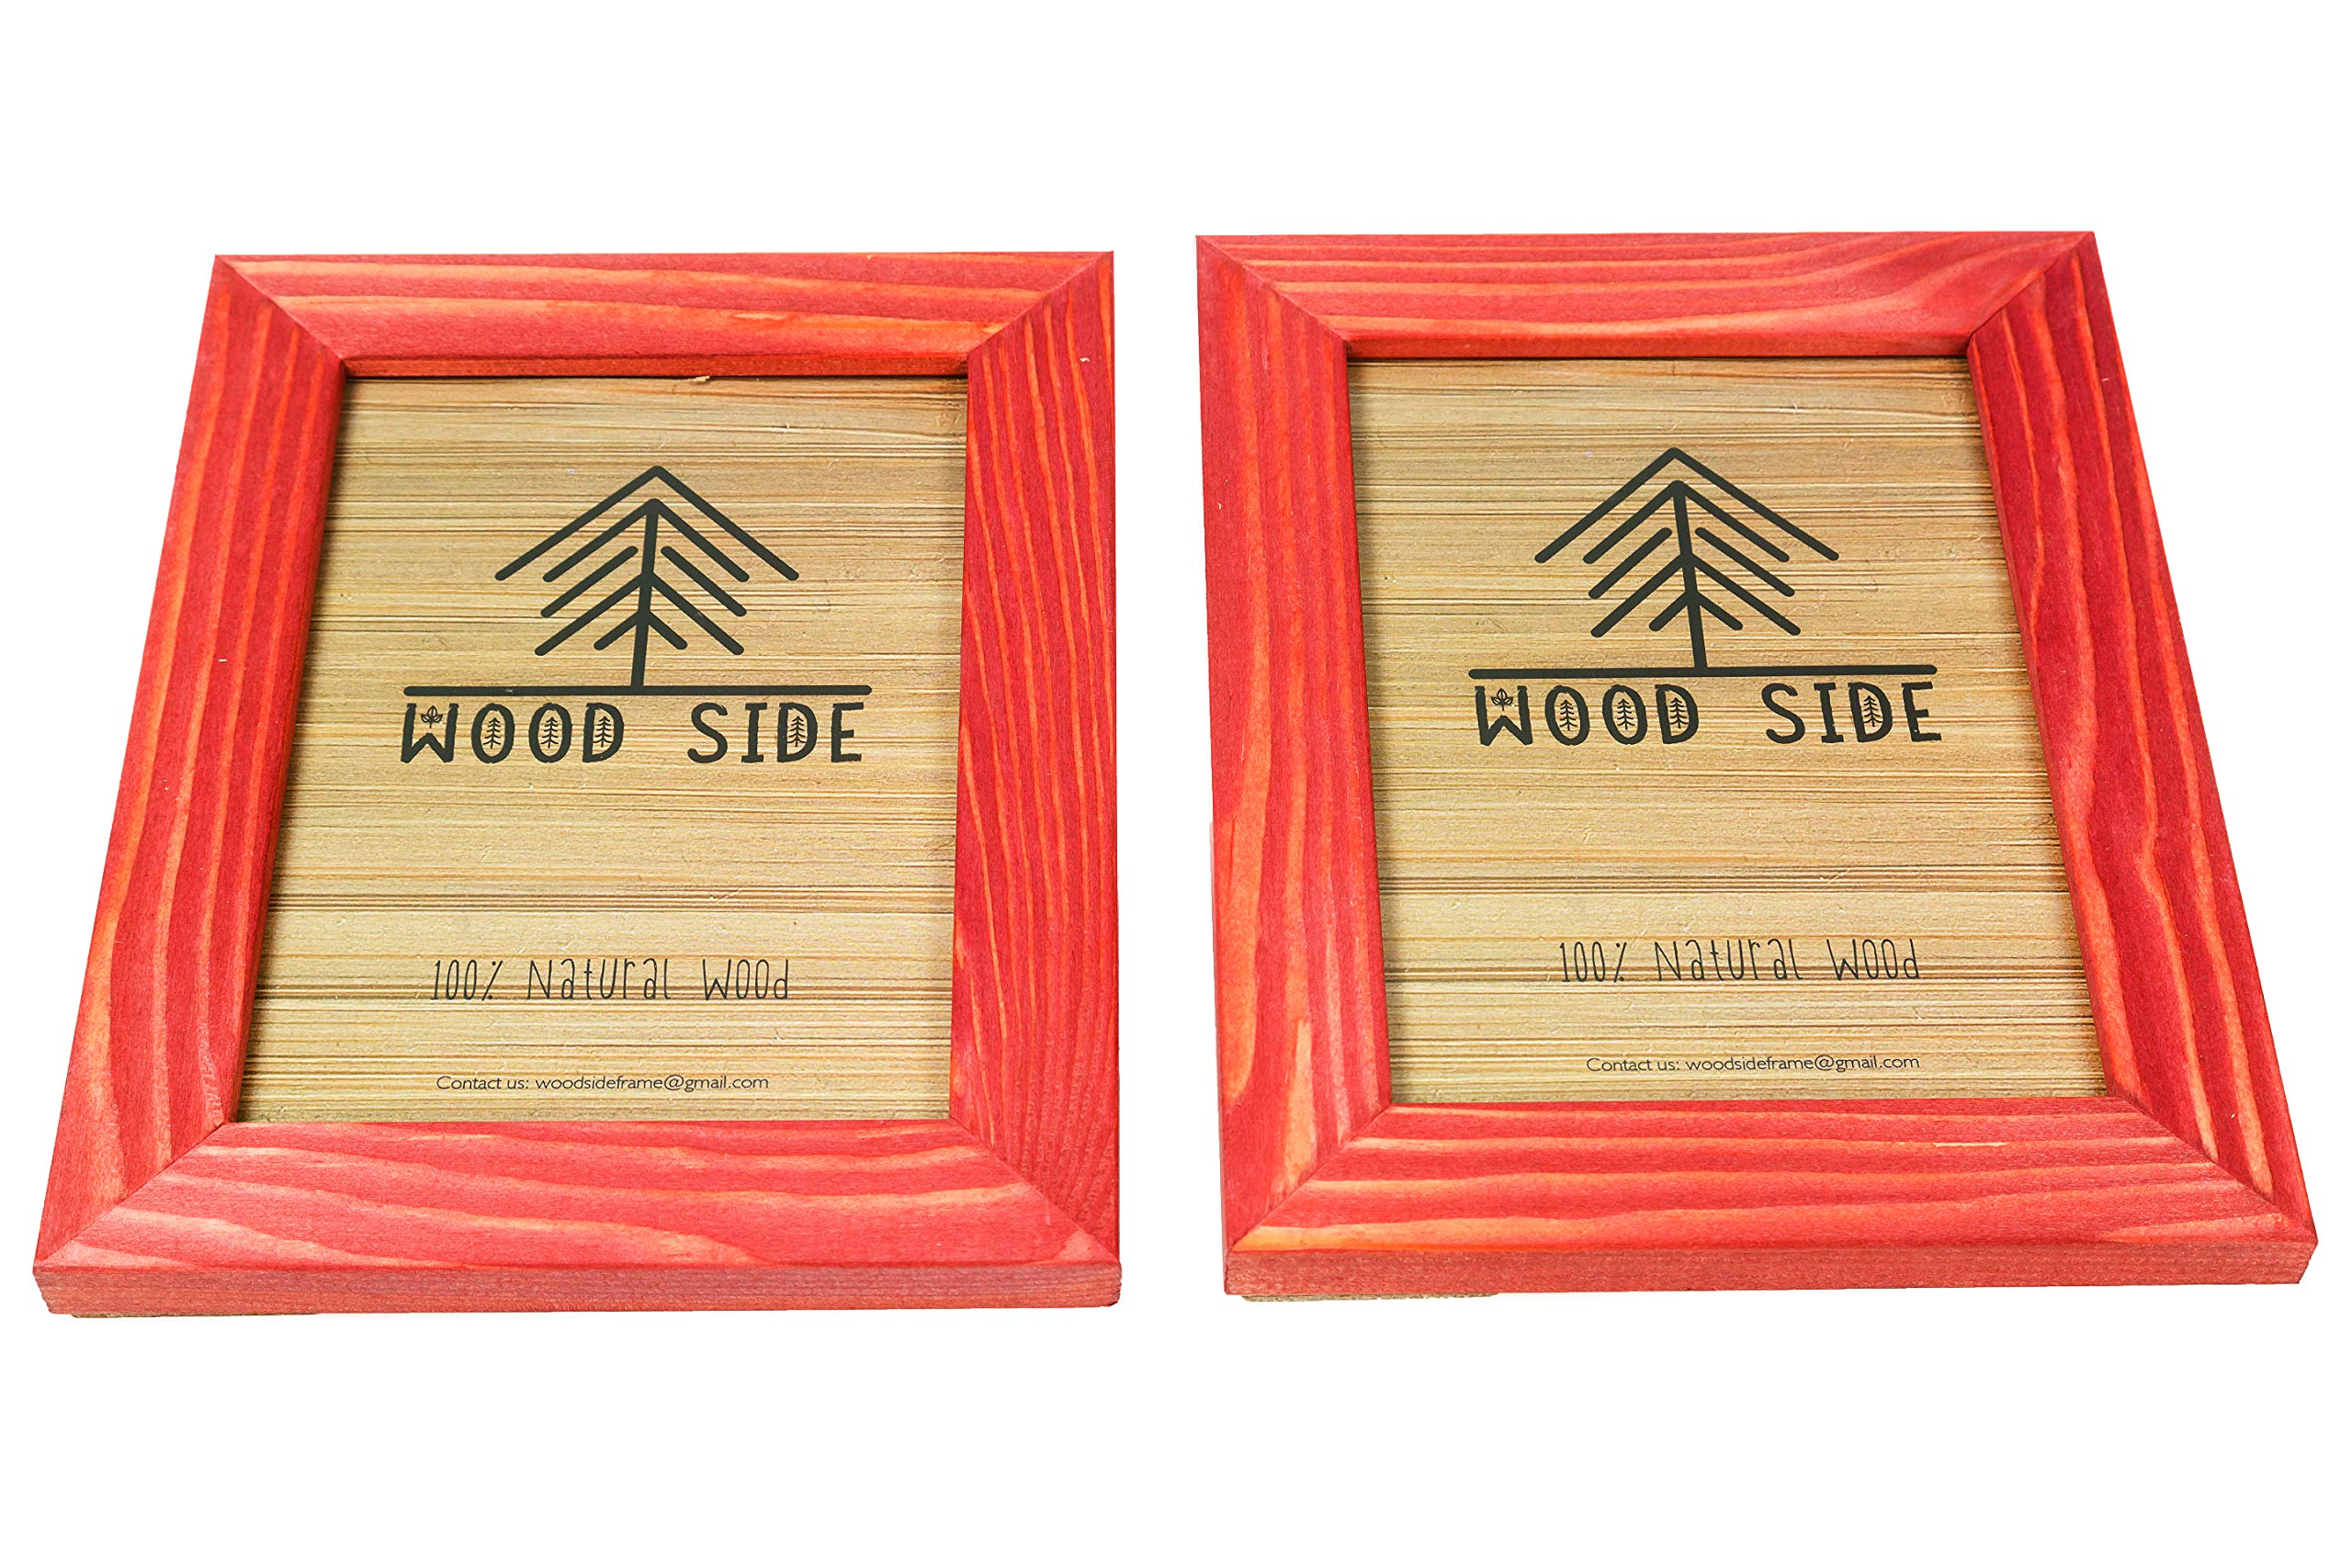 8.5 x 11 Wooden Rustic Picture Frames - Set of 2 for Diploma Documents and Certificates Wall Mount and Tabletop - Natural Wood Photo Frame - Red